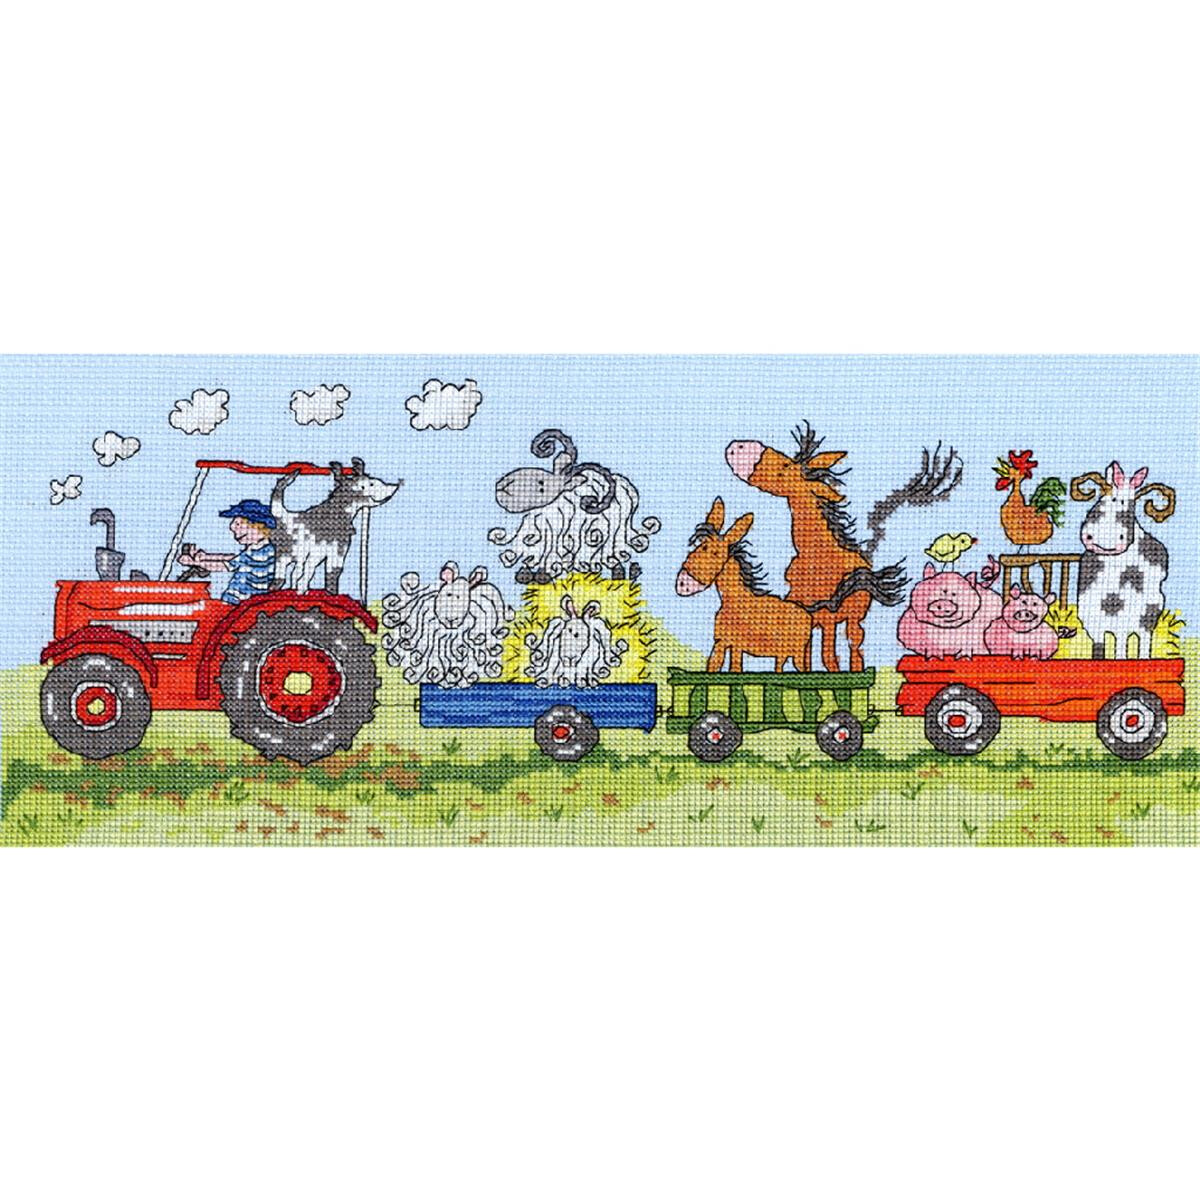 A red tractor driven by a farmer pulls three colorful...